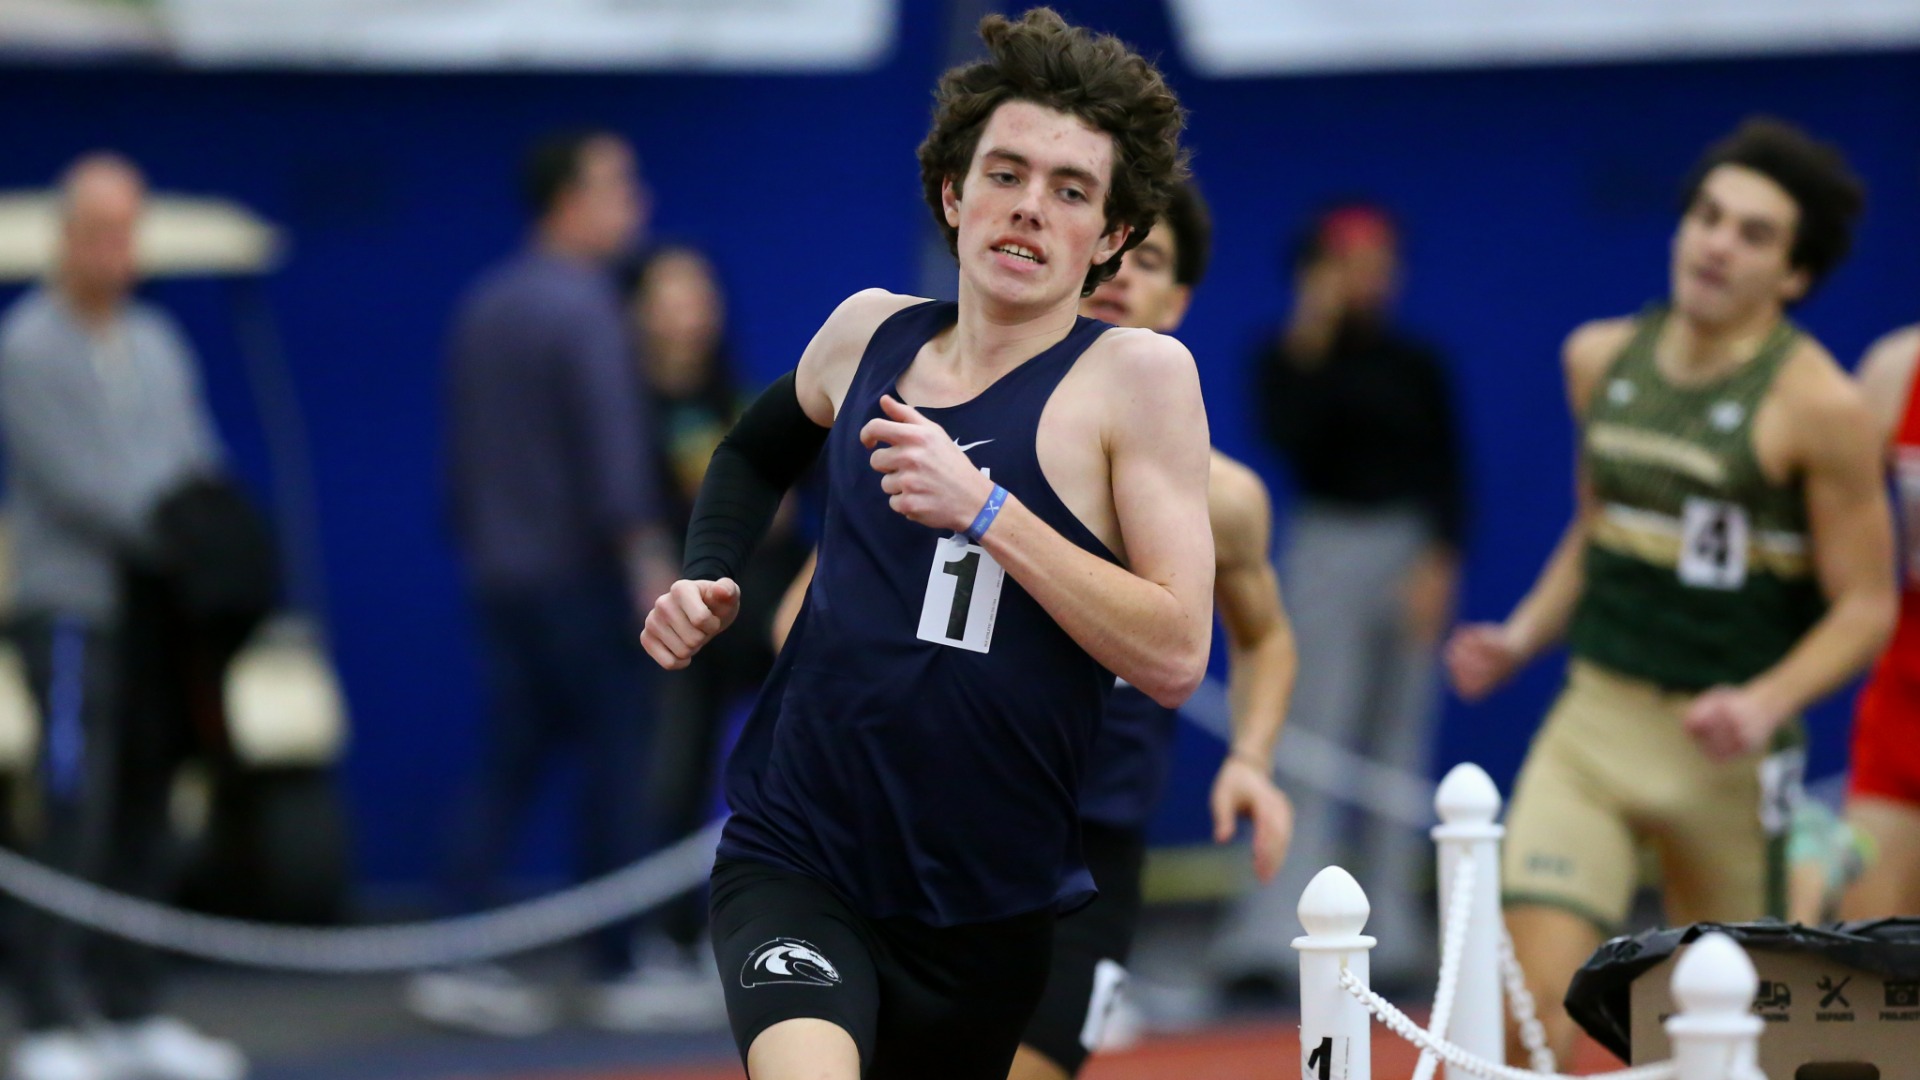 CBASlide 1 - INDOOR TRACK DOMINANT IN 26TH STATE CHAMPIONSHIP WIN